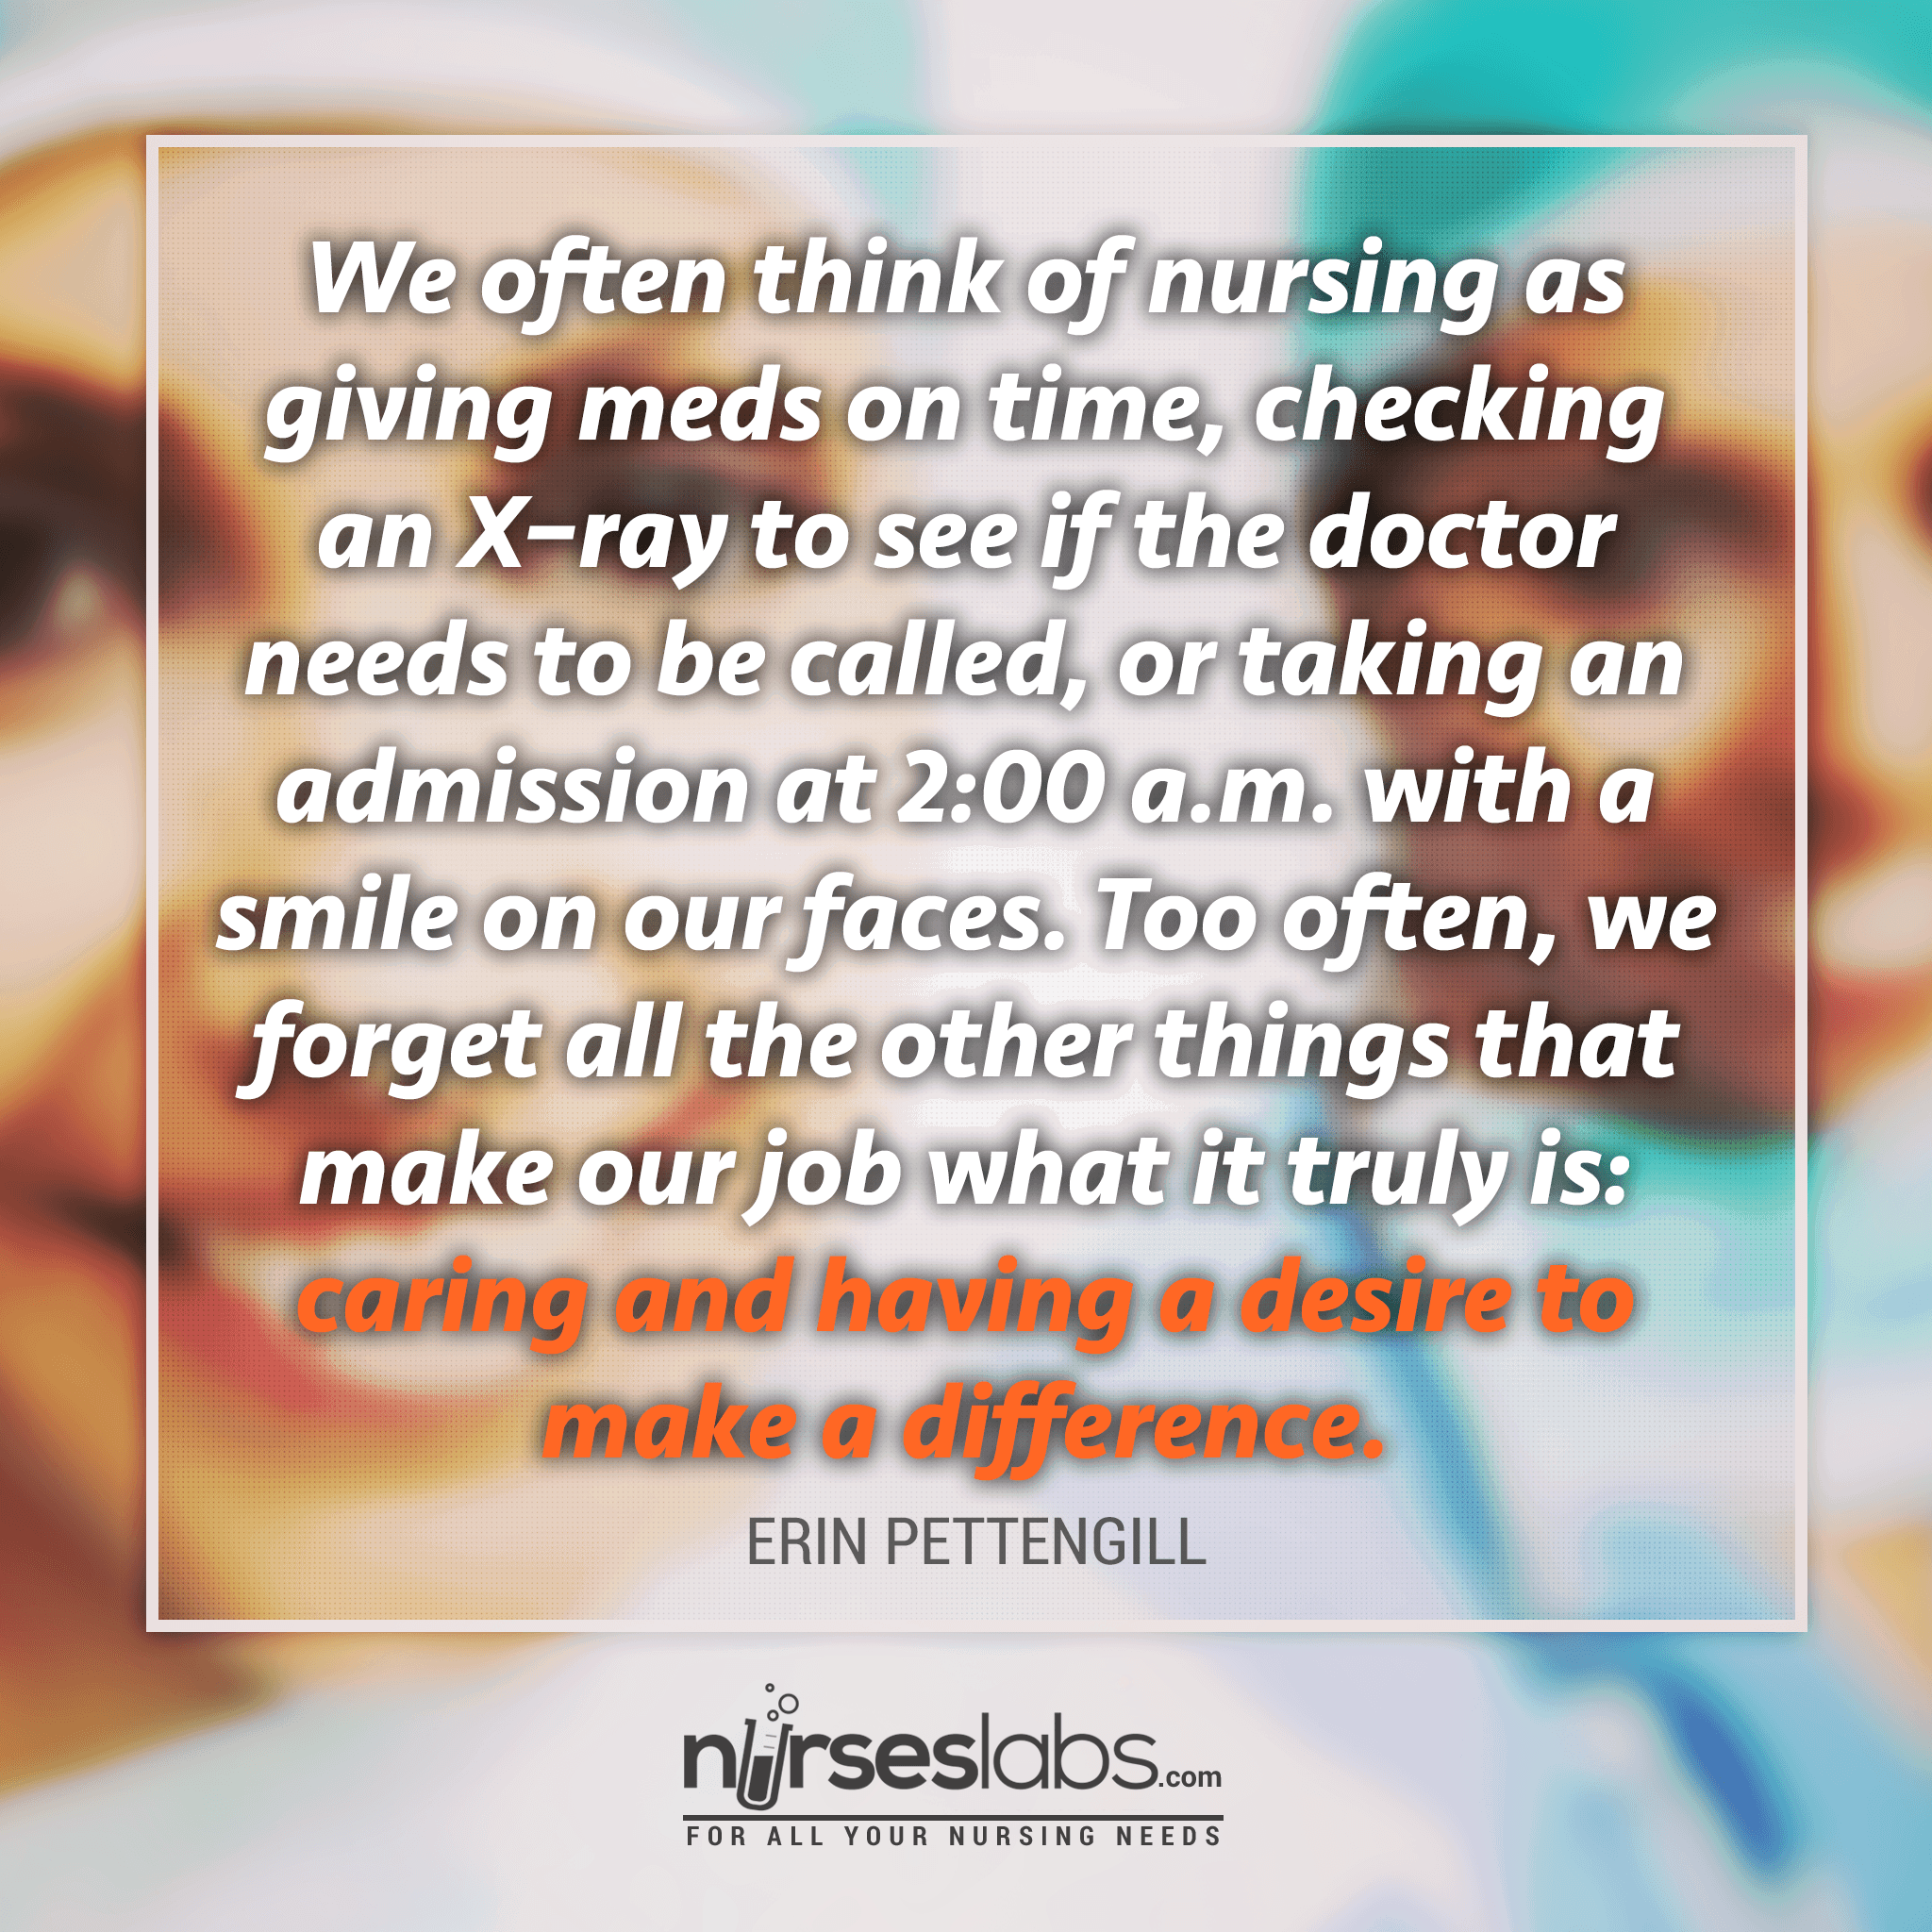 We often think of nursing as giving meds on time, checking an X–ray to see if the doctor needs to be called, or taking an admission at 2:00 a.m. with a smile on our faces. Too often, we forget all the other things that make our job what it truly is: caring and having a desire to make a difference.